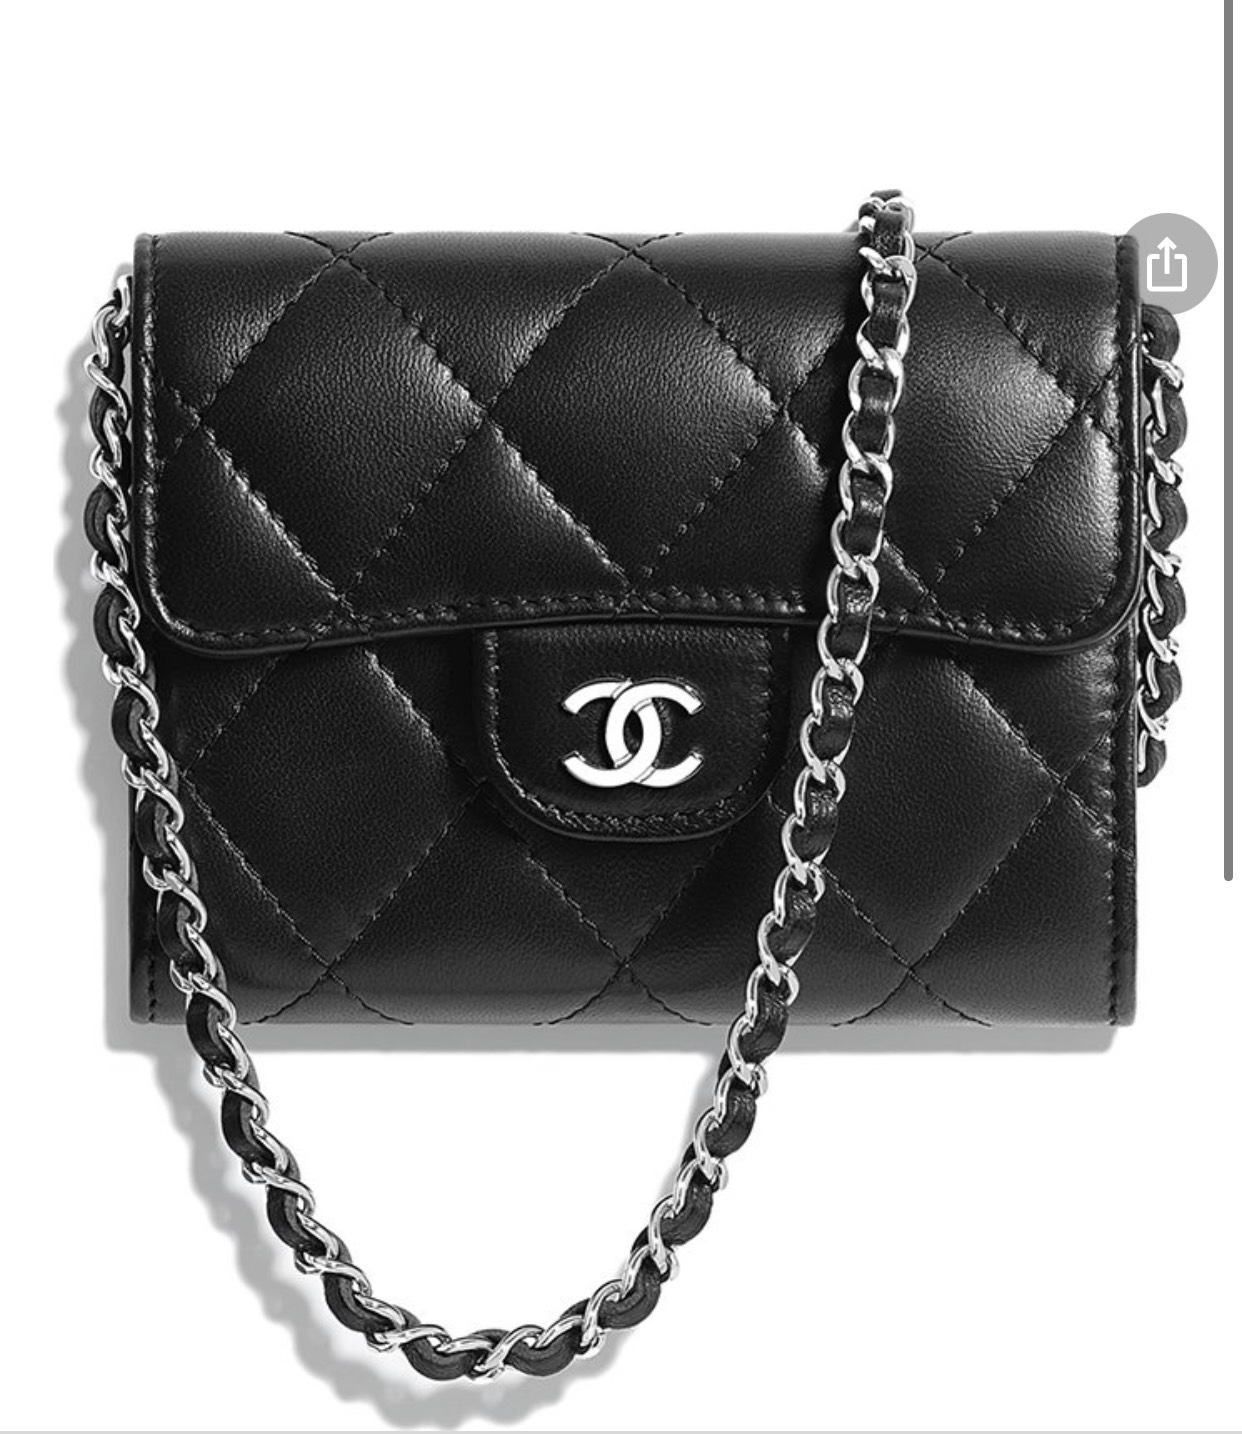 Wallet on chain chanel 19 leather handbag Chanel White in Leather  26804470